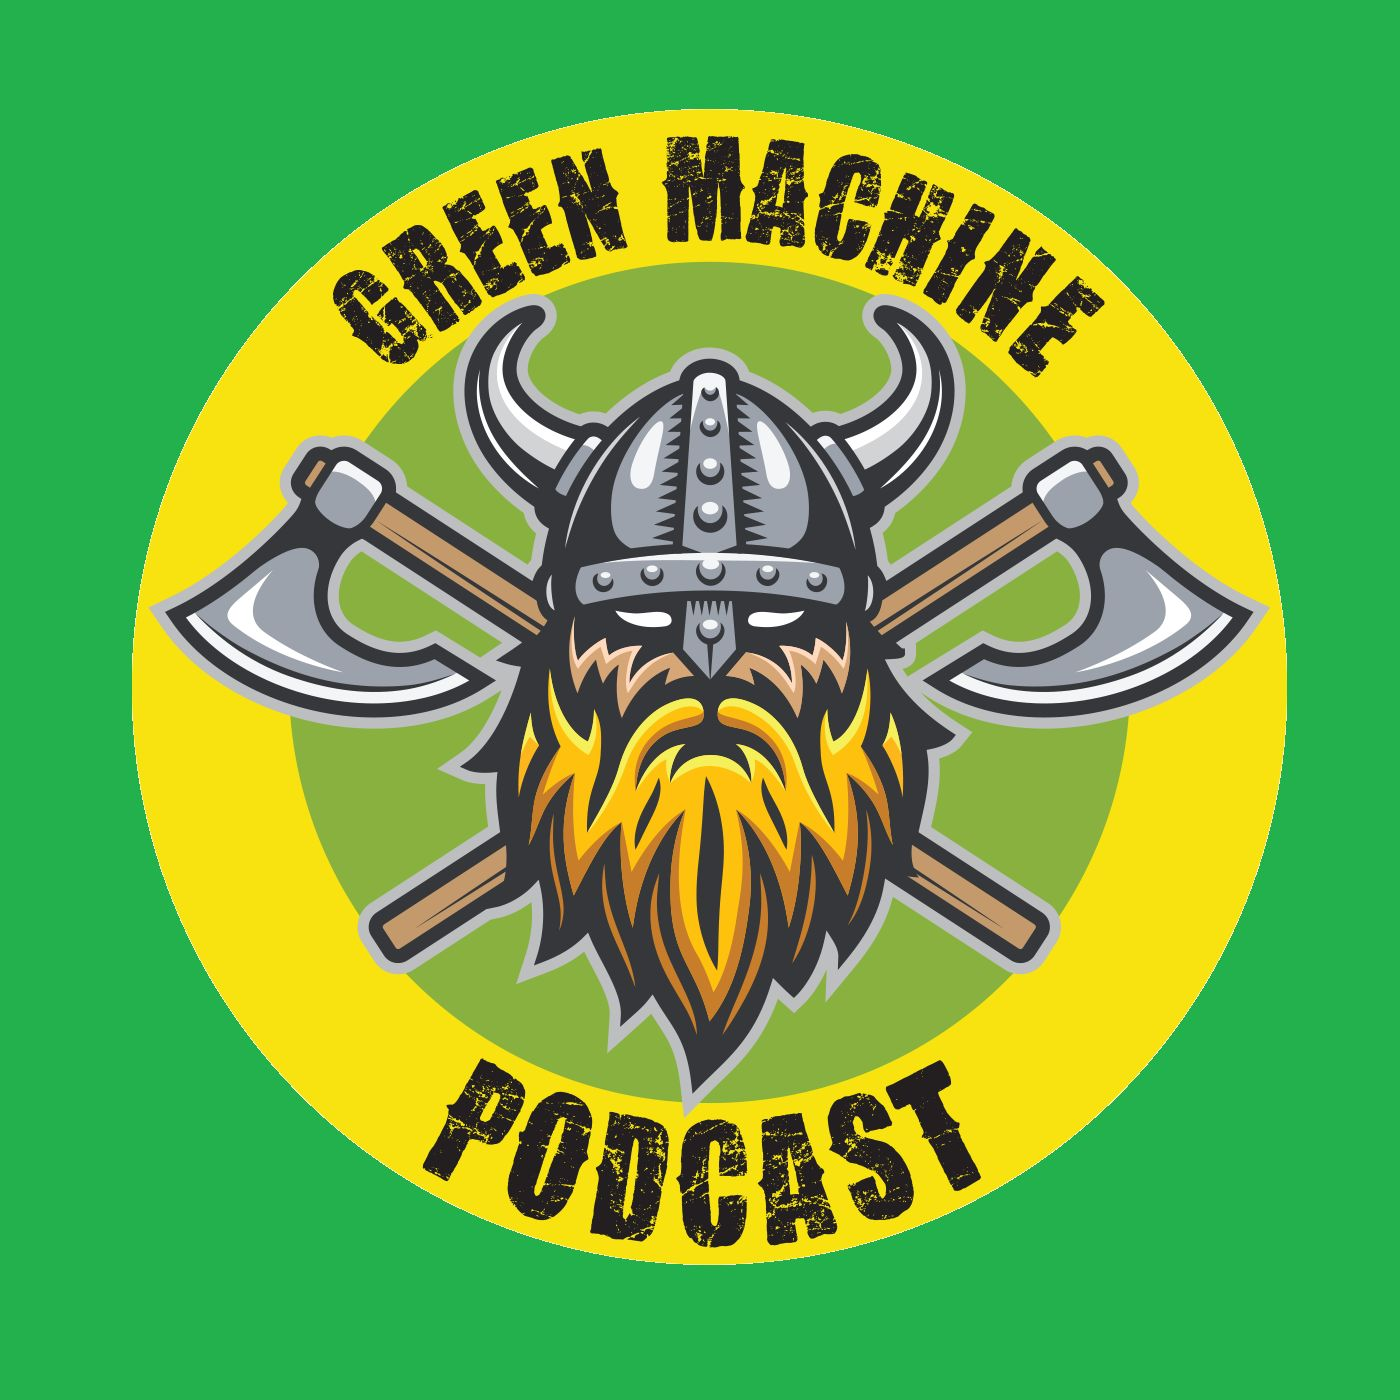 Green Machine Podcast - Episode 176 - Taking The Pearce